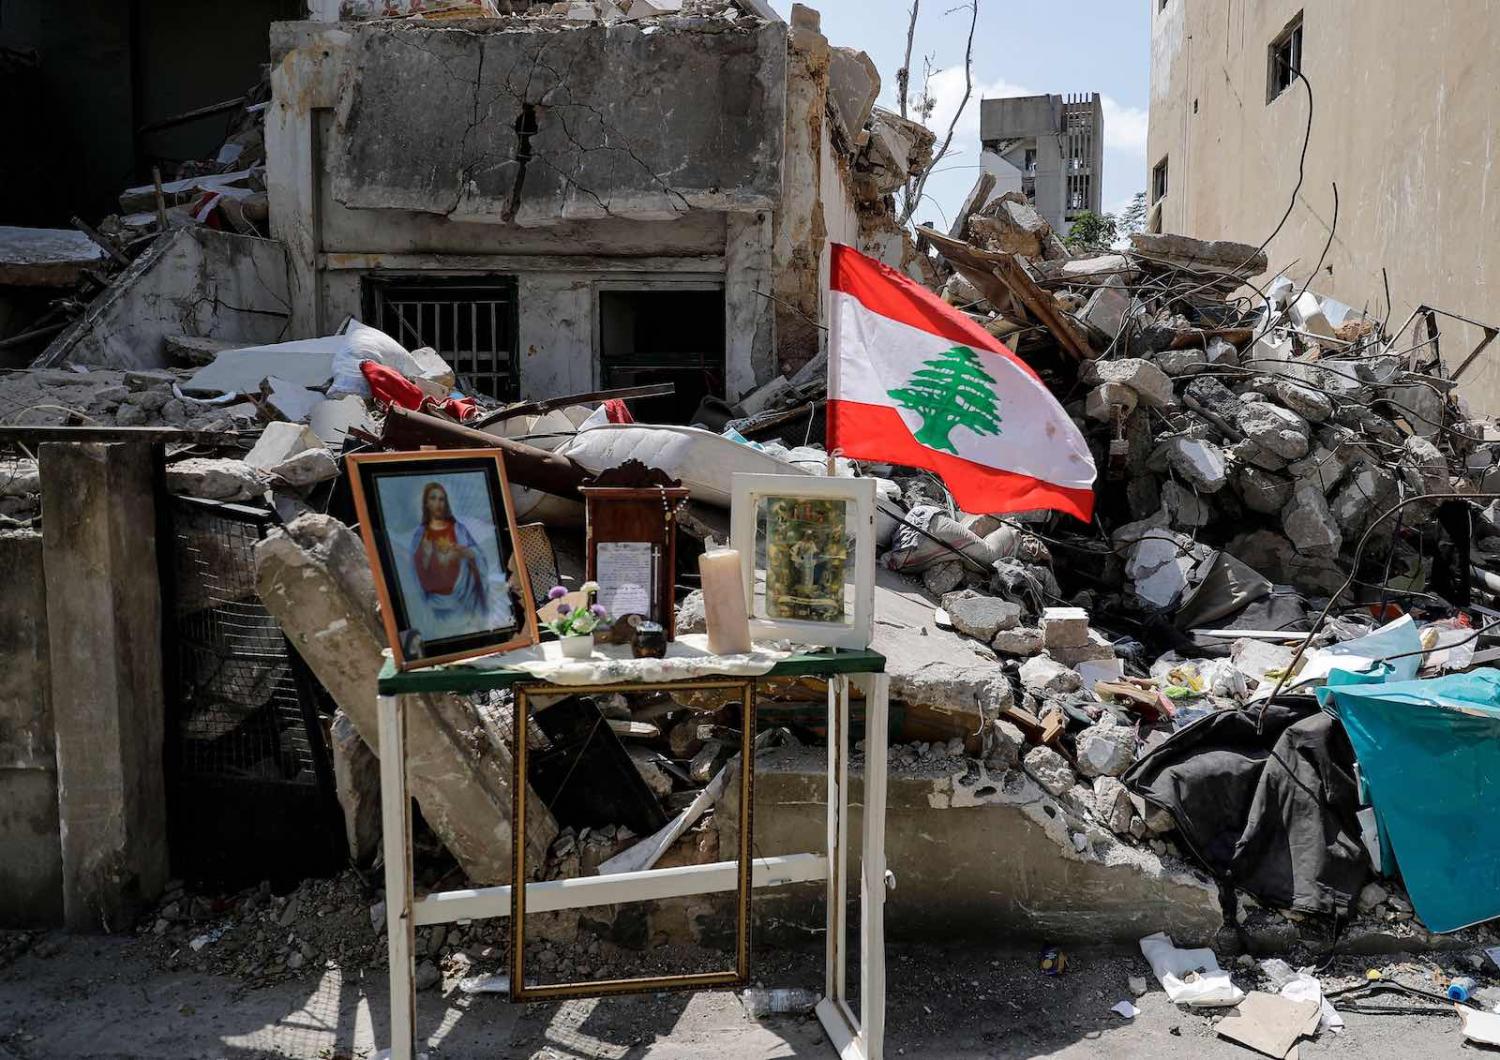 A makeshift Christian shrine in Beirut in the wake of the 4 August blast (Joseph Eid/AFP via Getty Images)